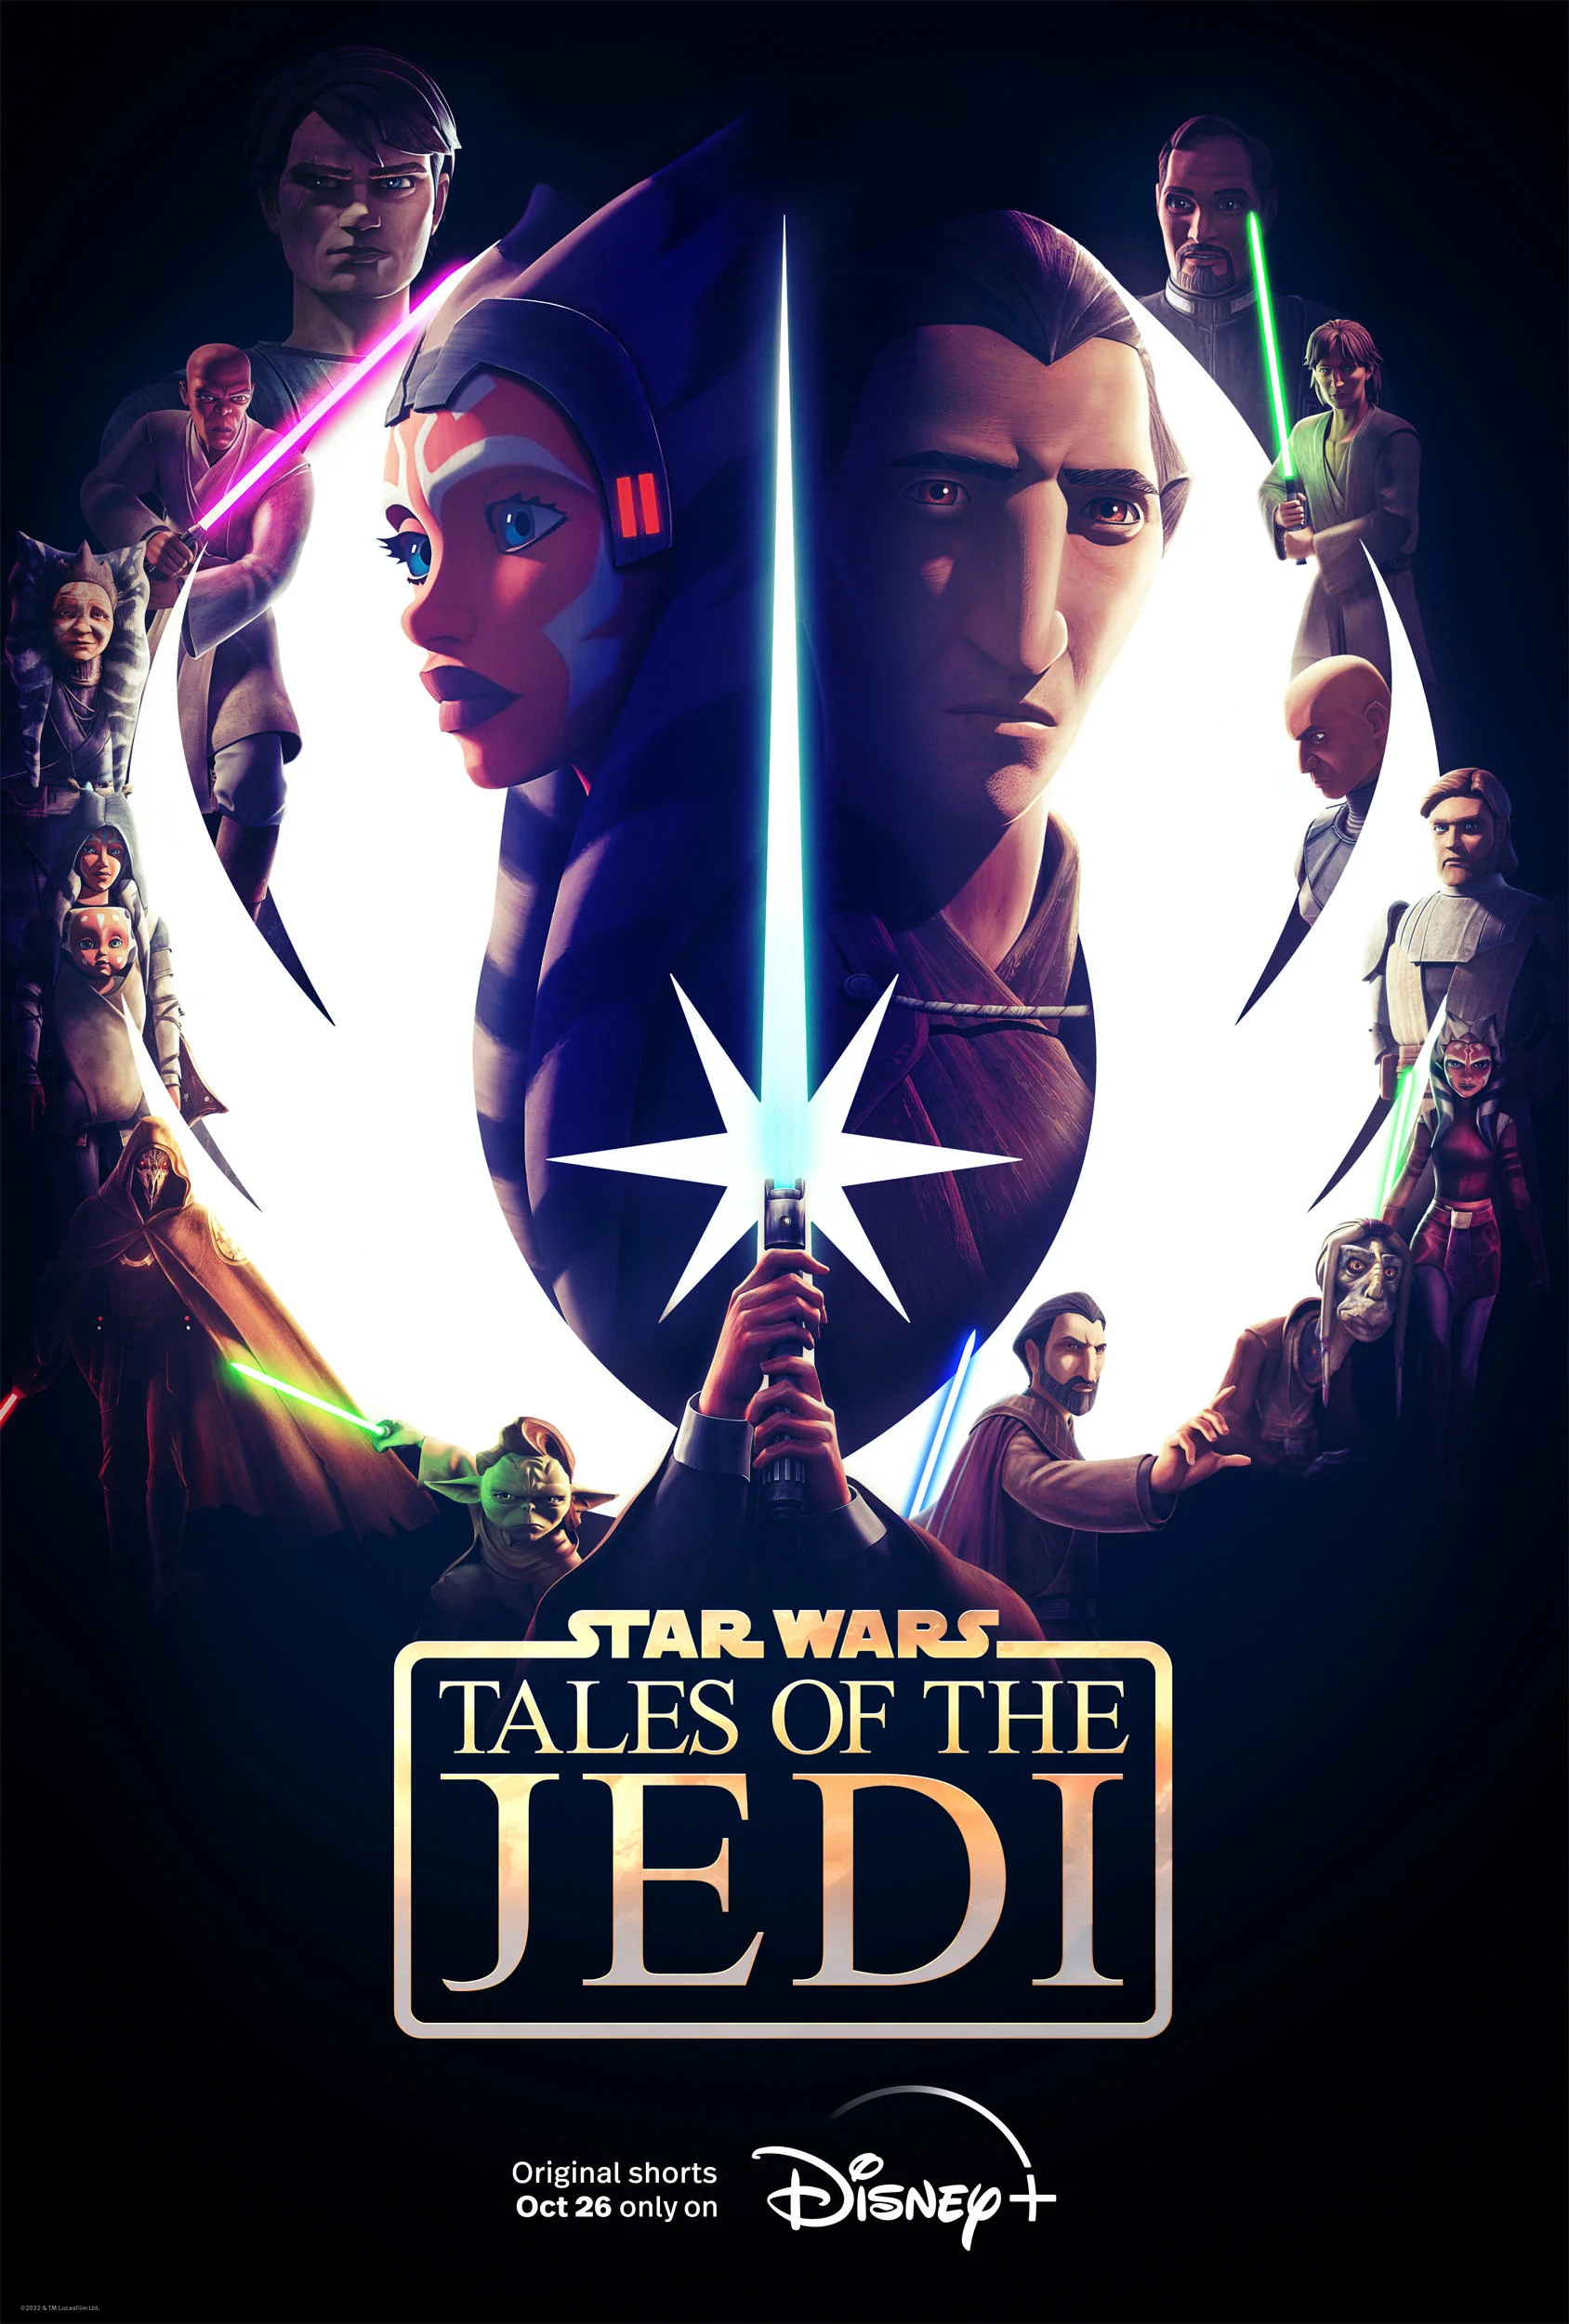 Tales of the Jedi Poster Teases Returning Characters 